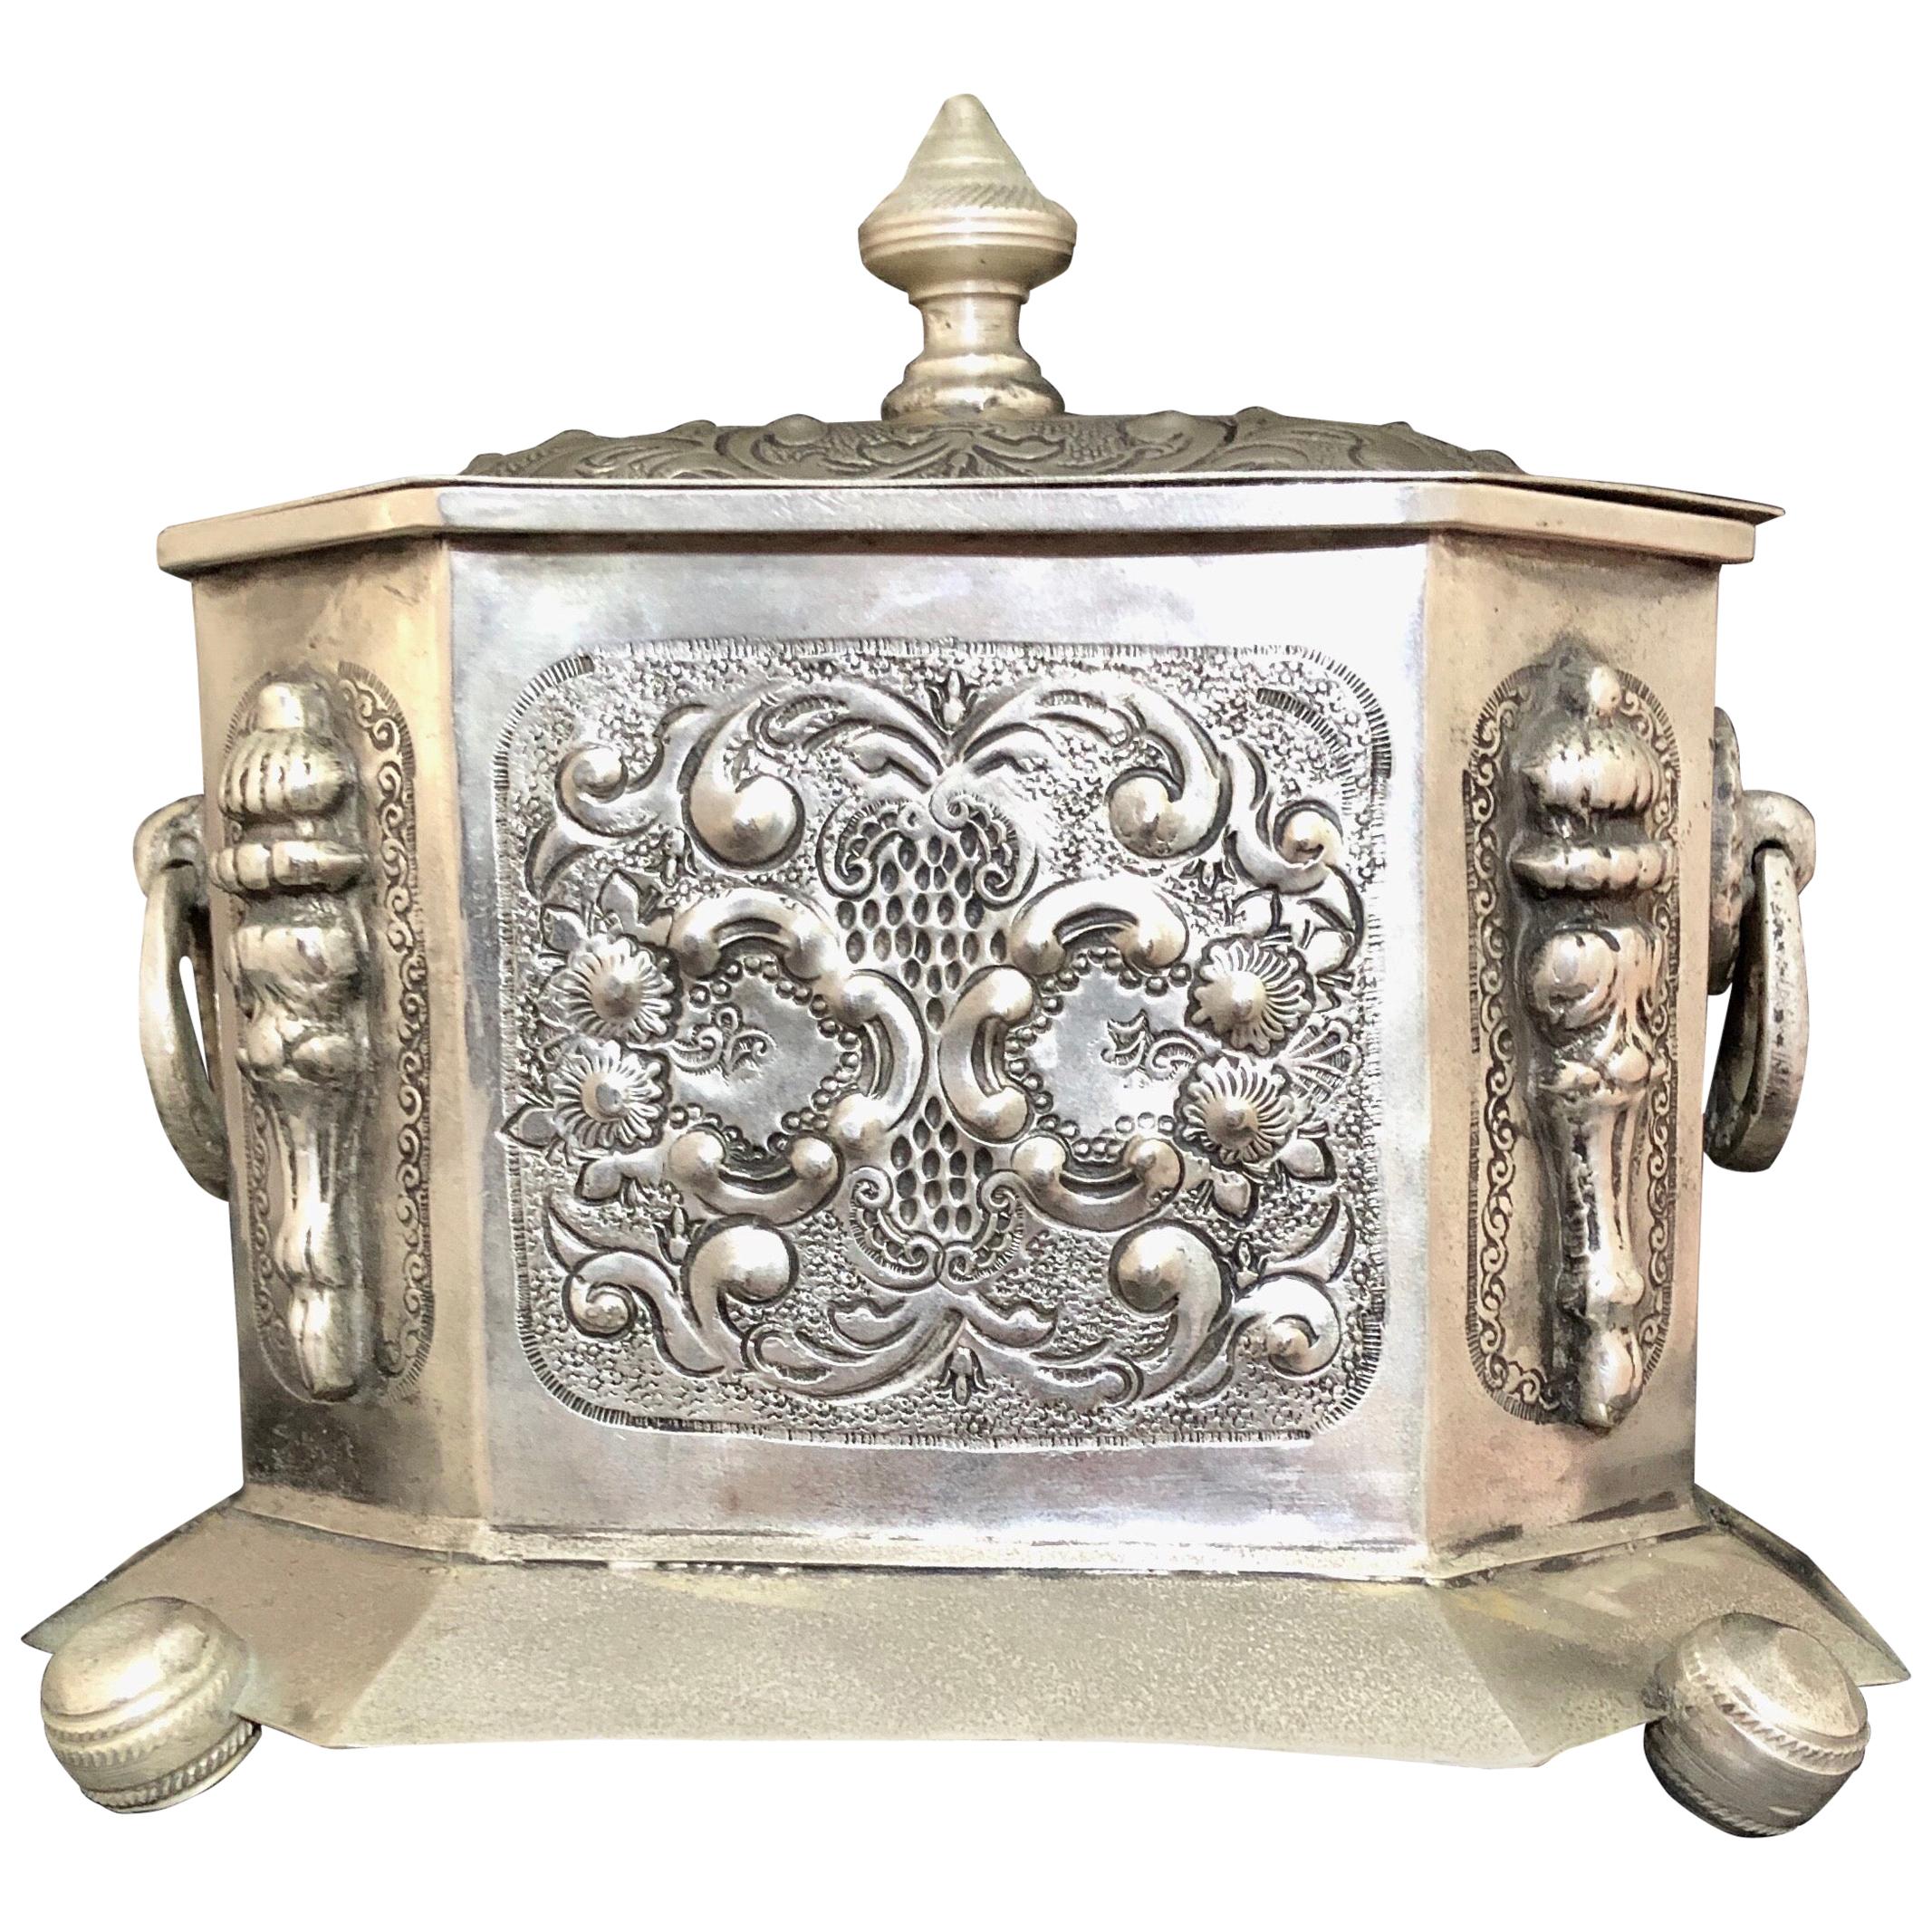 https://a.1stdibscdn.com/early-20th-century-moroccan-silver-tea-box-with-repousse-engraving-stamped-for-sale/1121189/f_159291221566920127678/15929122_master.jpg